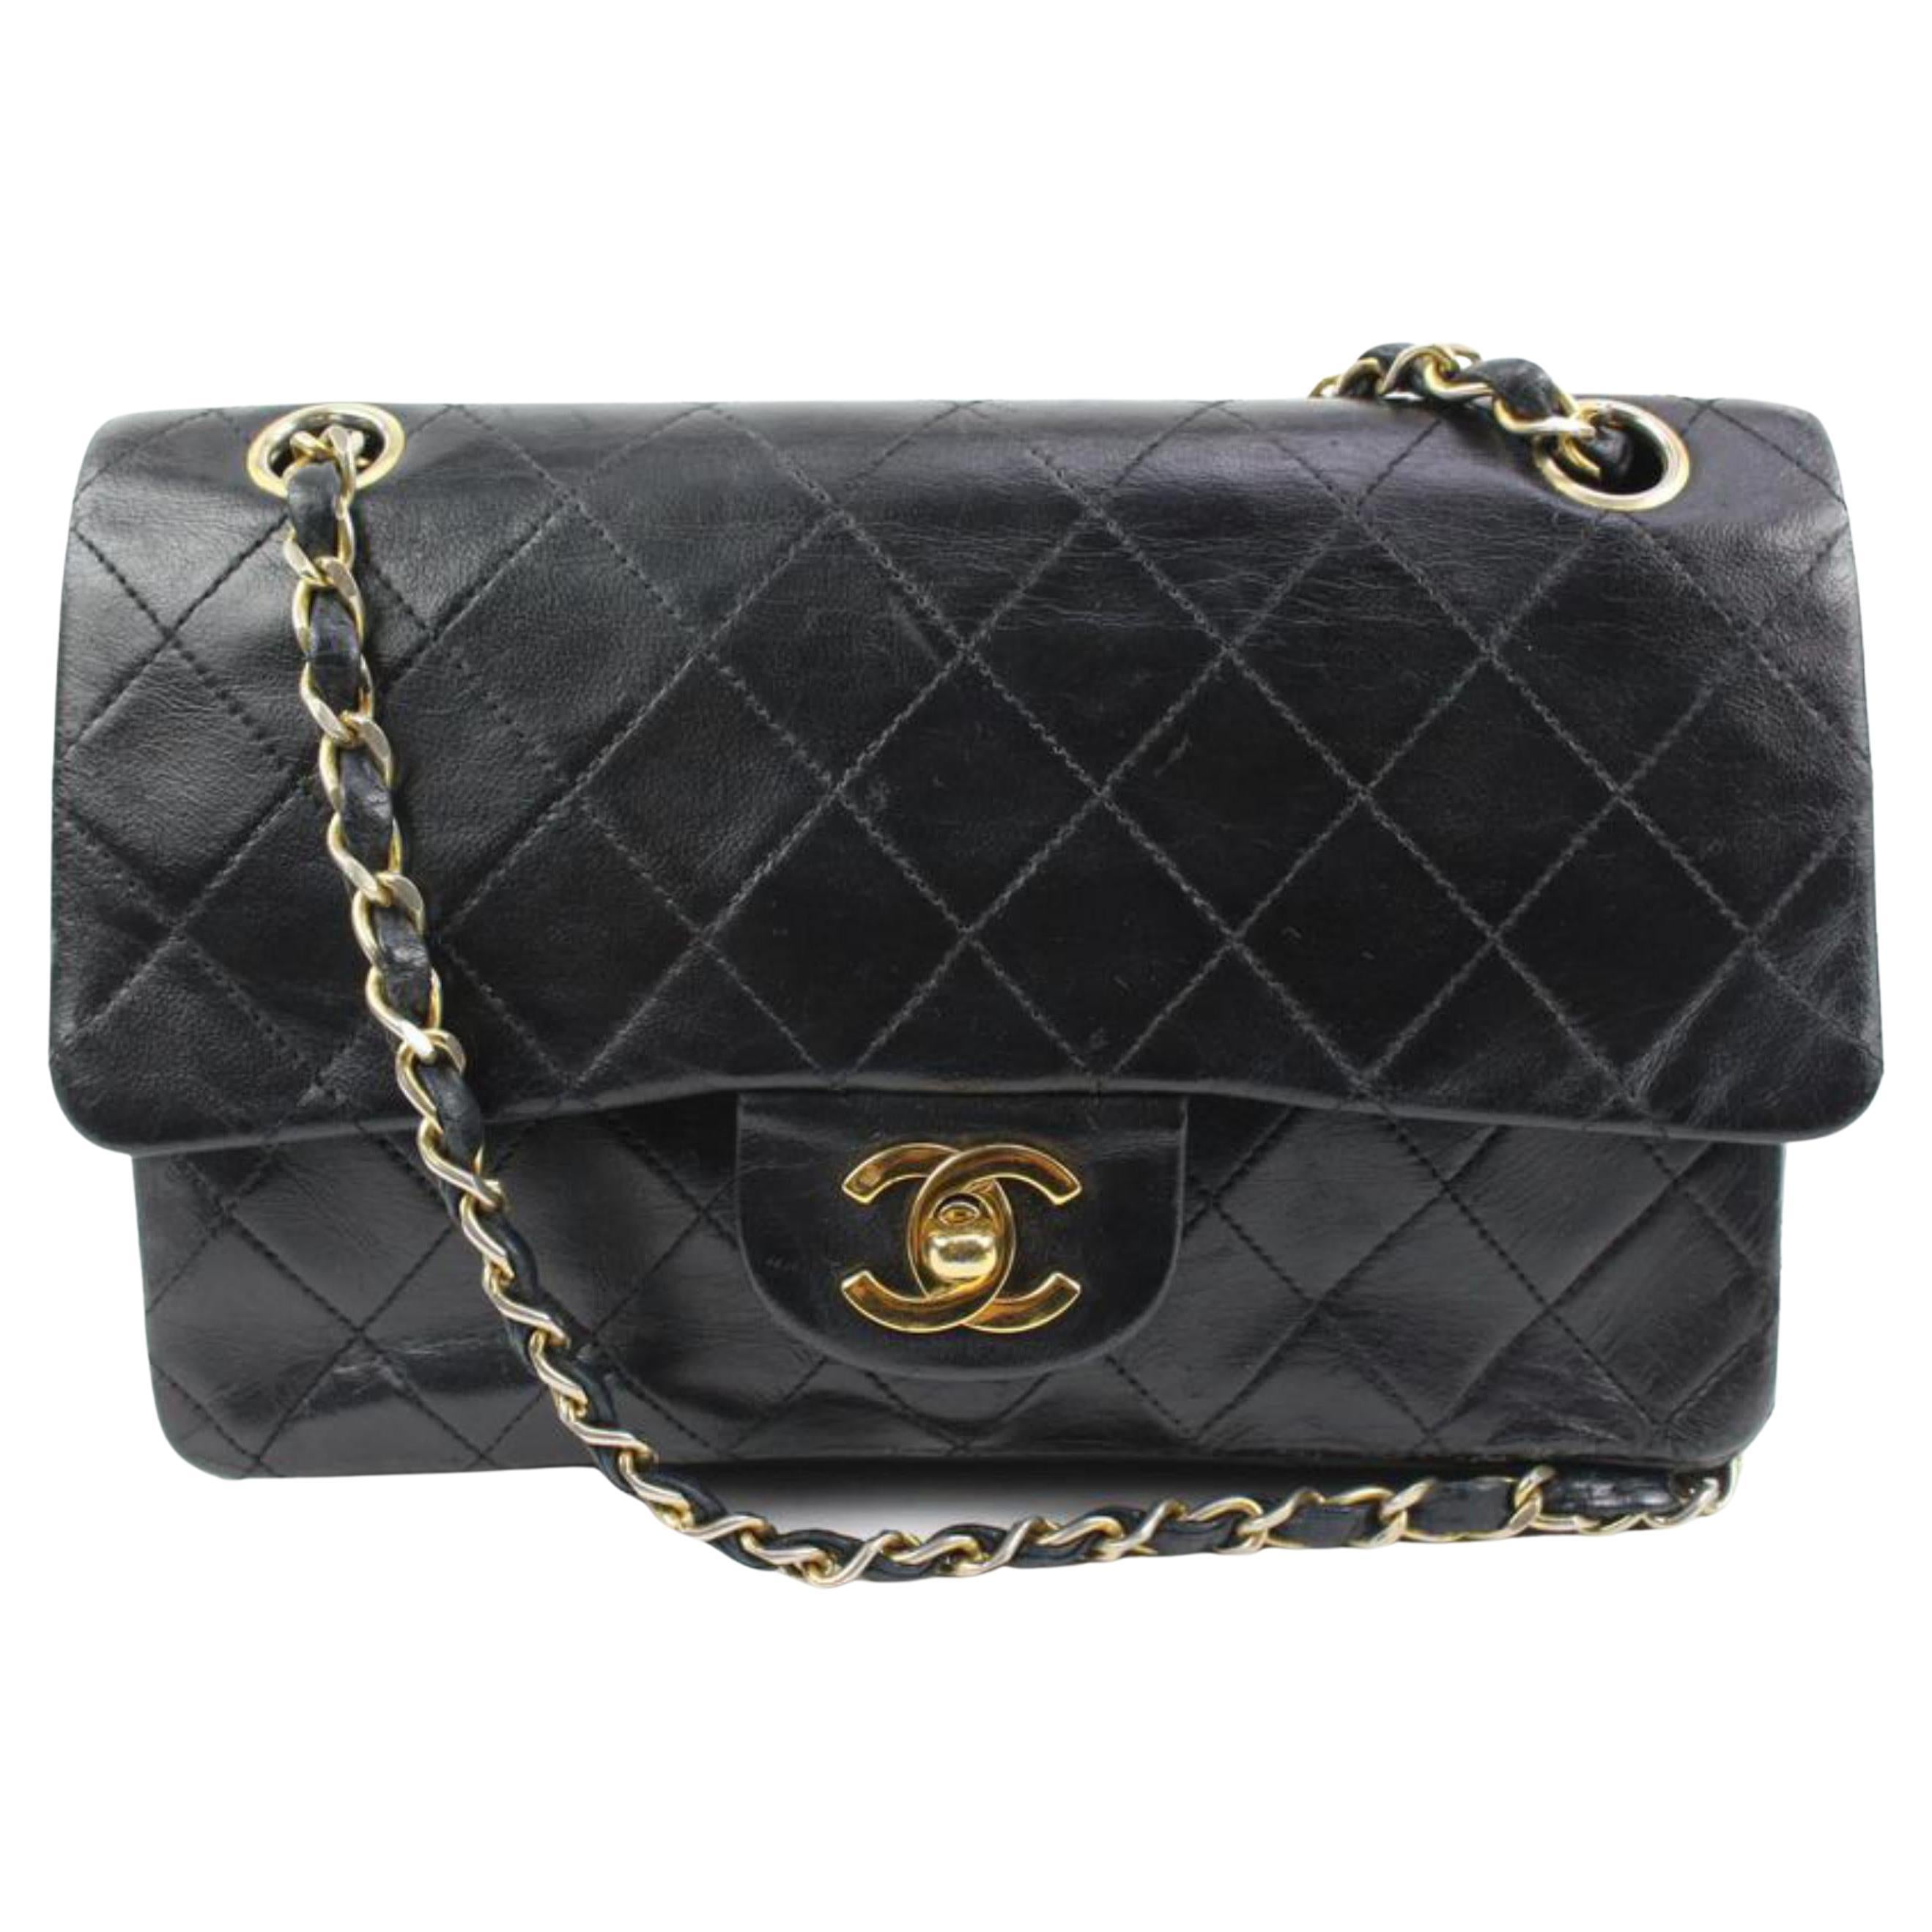 Chanel Handbags And Accessories - New Arrivals – Madison Avenue